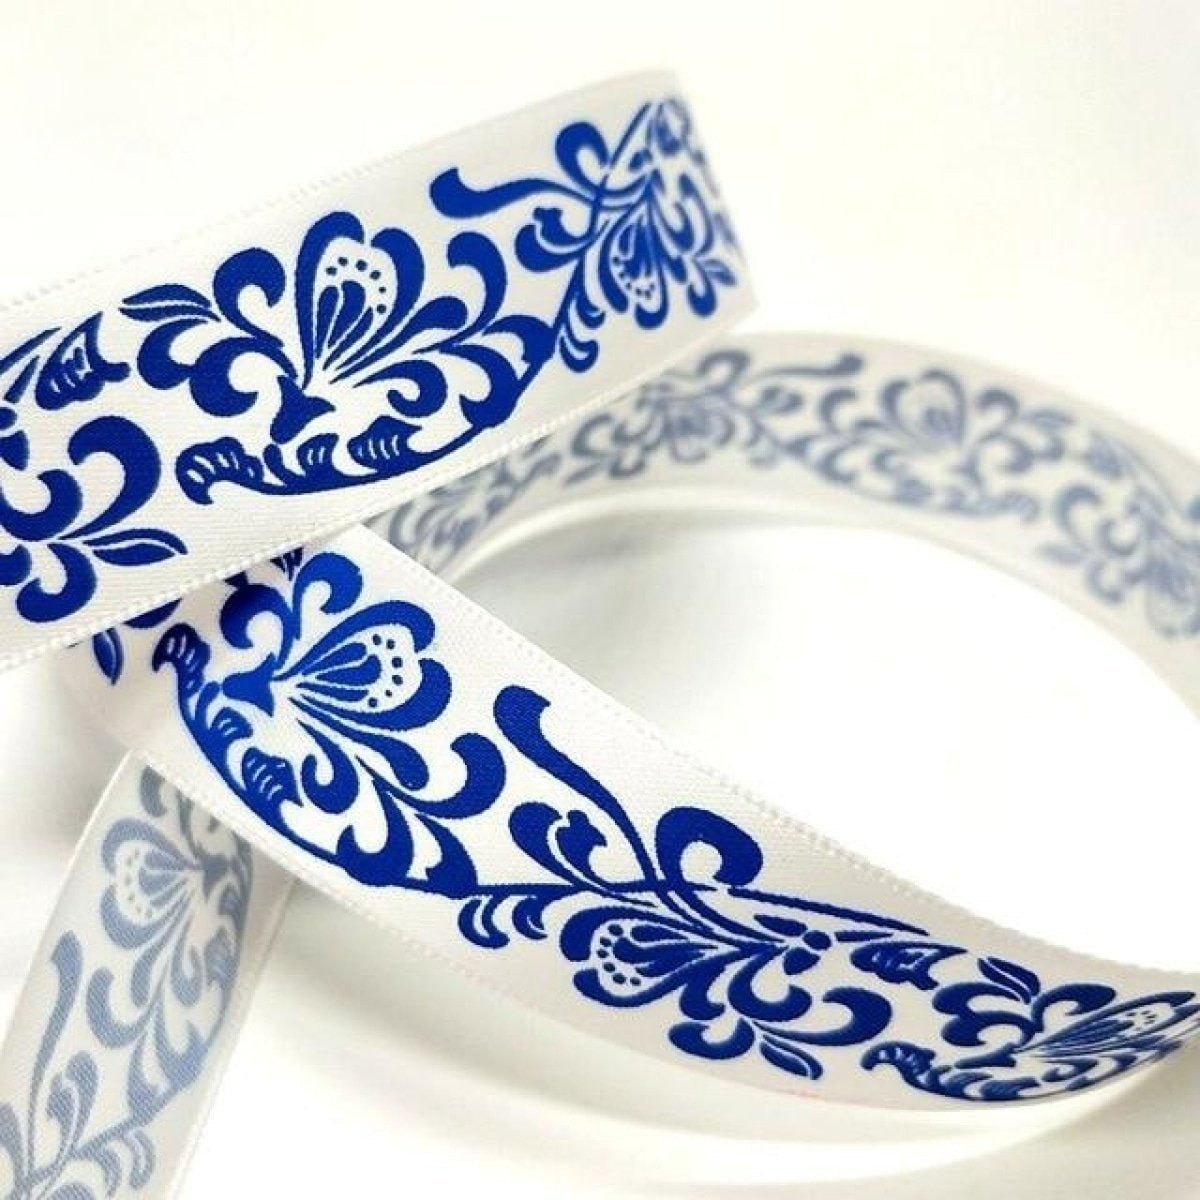 5M Polyester Ribbons 25Mm Diy Gift Wrapping Hair Accessories Sewing Bow Wedding Decorations Blue And